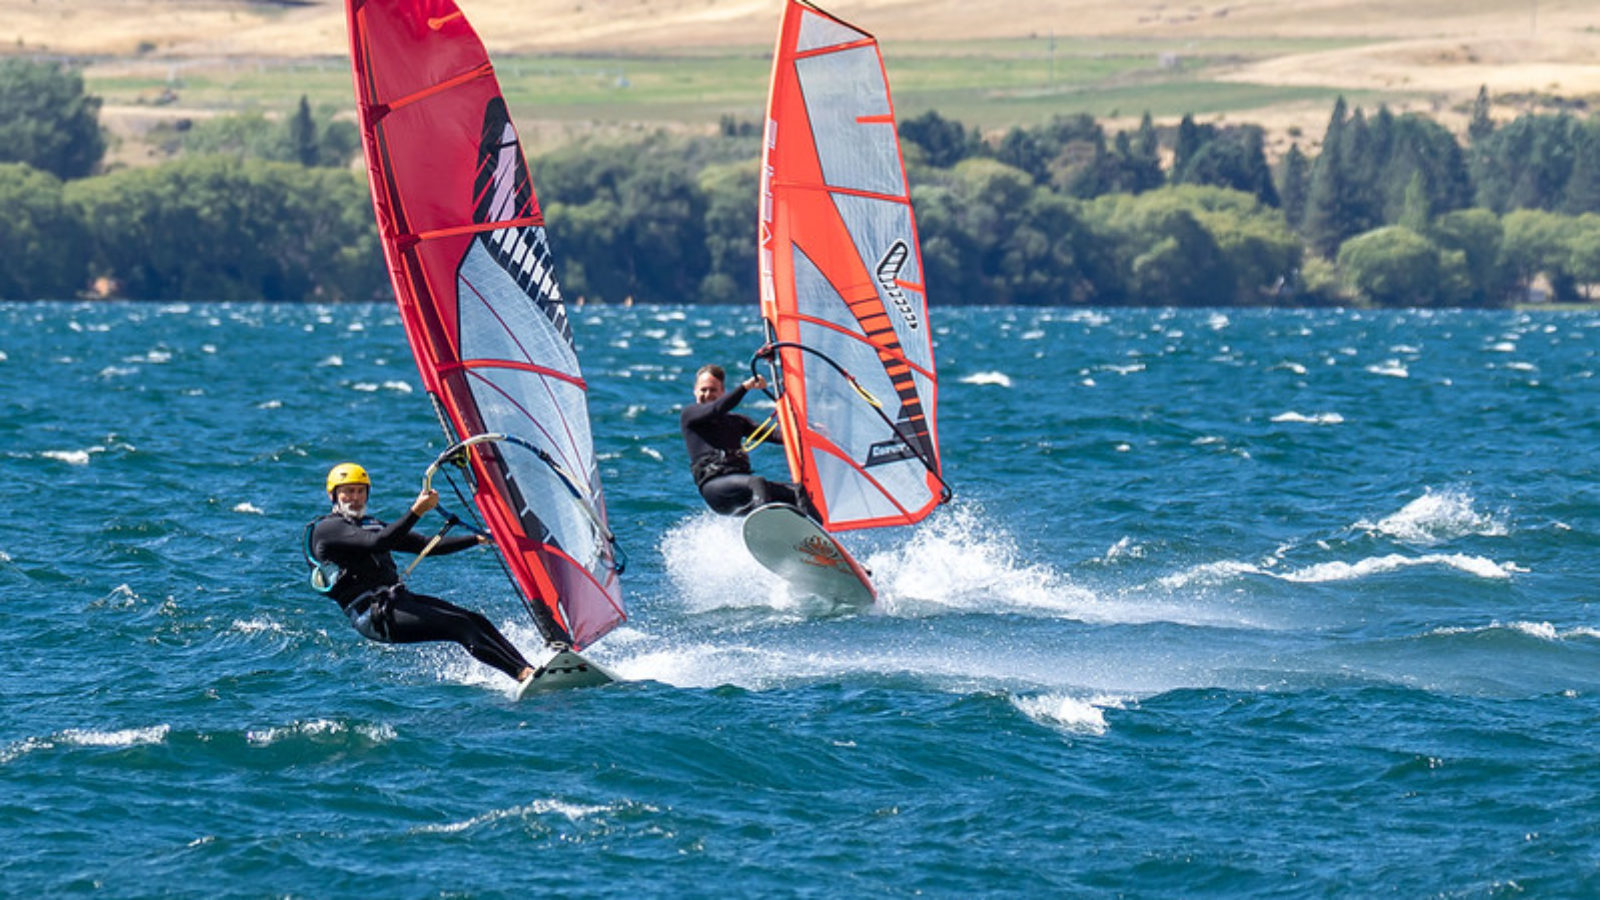 Two Windsurfers powered up on Lake Aviemore